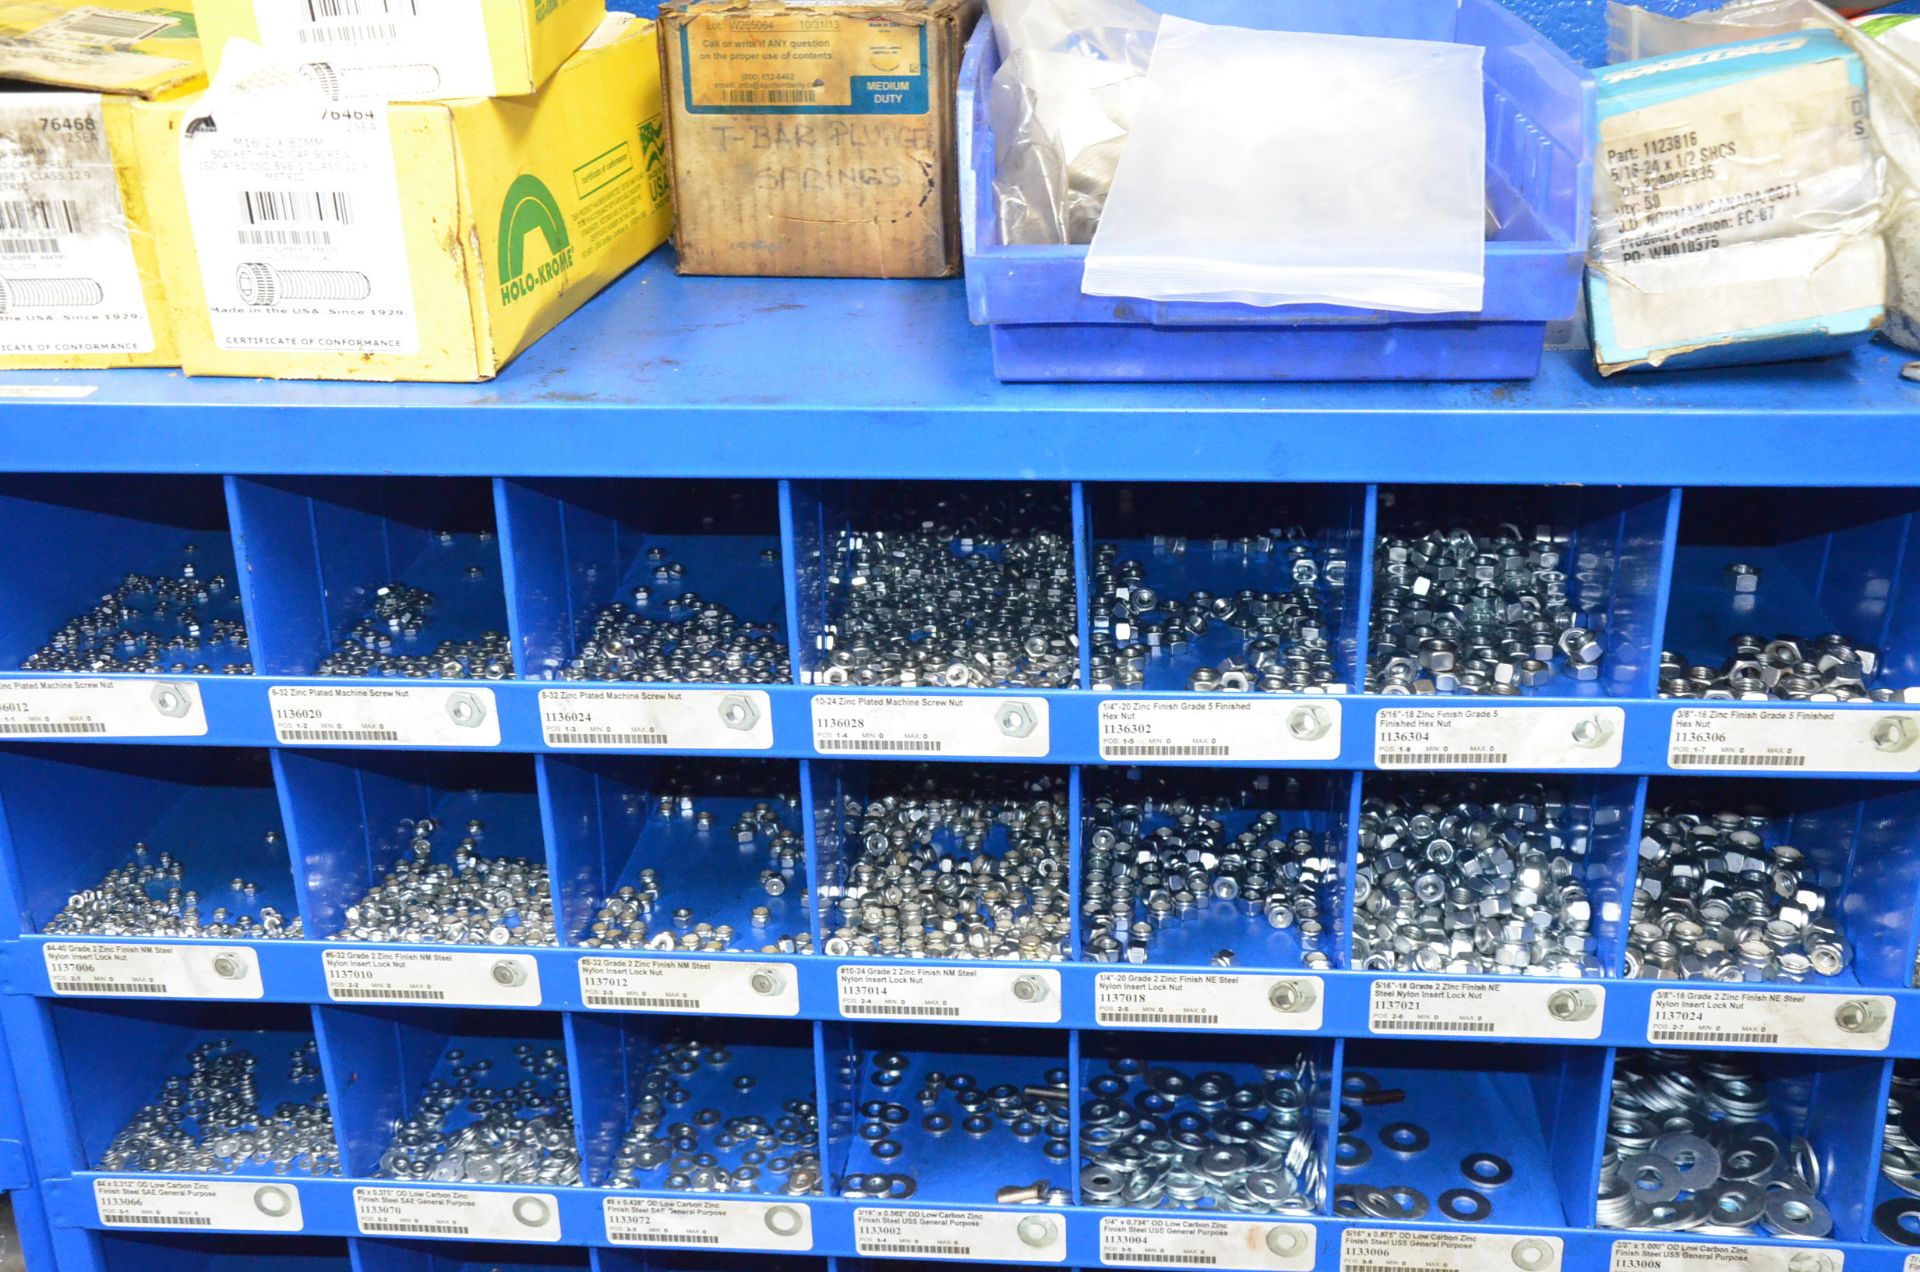 LOT/ FASTENAL PIGEON HOLE INDEX CABINETS WITH FASTENING HARDWARE - Image 4 of 11